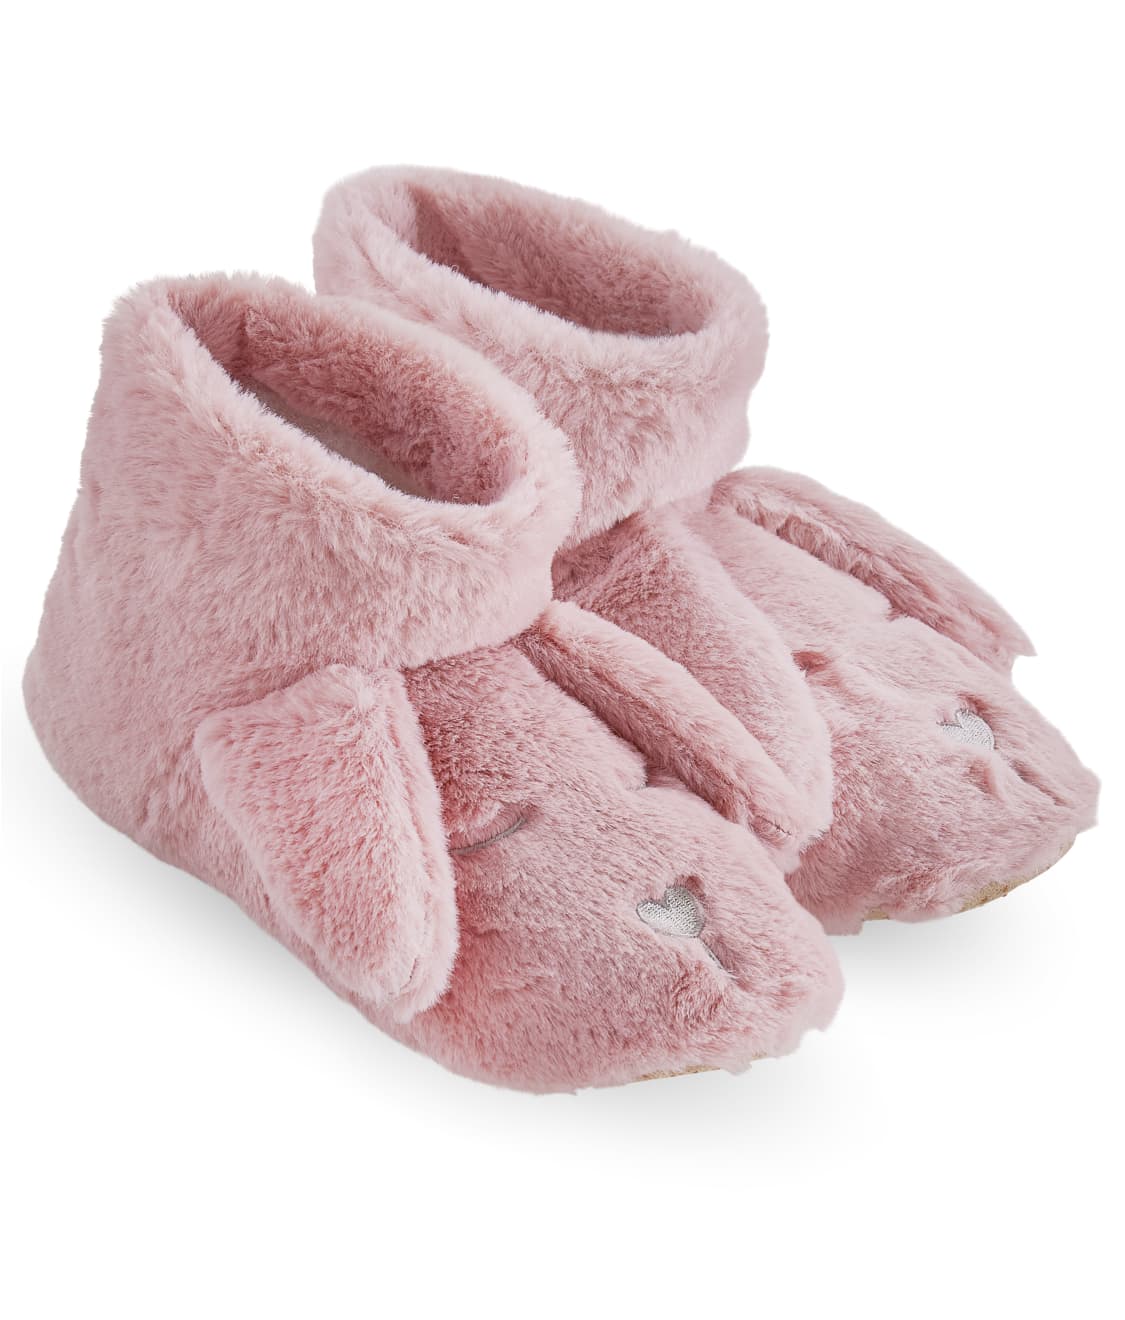 HUE Critter Bunny Bootie Slippers & Reviews | Bare Necessities (Style